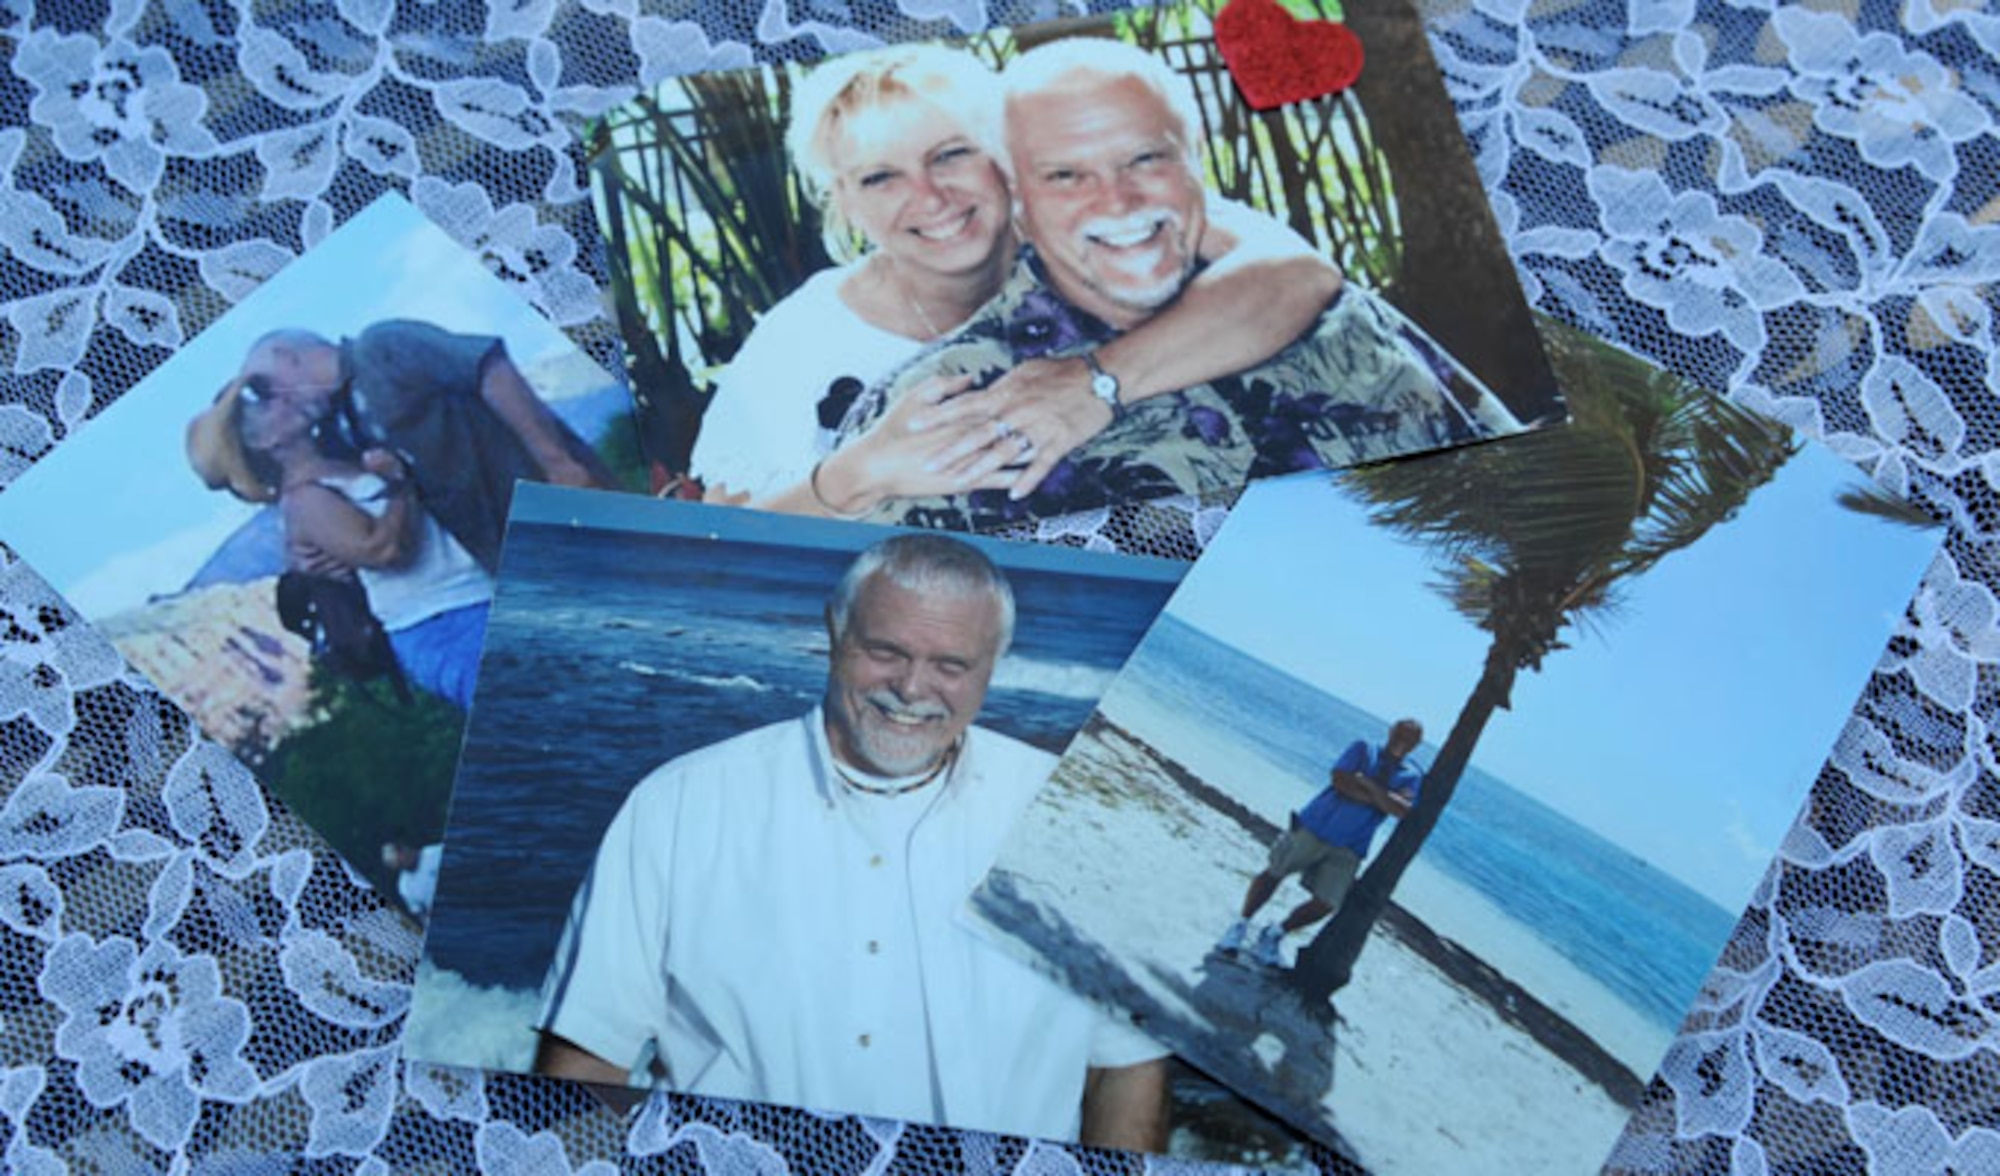 A collage of photos of Alison Miller and her late husband, retired Master Sgt. Chuck Dearing, are displayed on a table Jan. 16, 2014, at the Keesler Air Force Base camp site, Biloxi, Miss., while Miller is interviewed for an article about her traveling journey to honor their lives together. Following the couple’s four year cross-country travel experience, Miller continues to travel as she spreads Dearing’s cremains at their favorite destinations. (U.S. Air Force photo/Kemberly Groue)